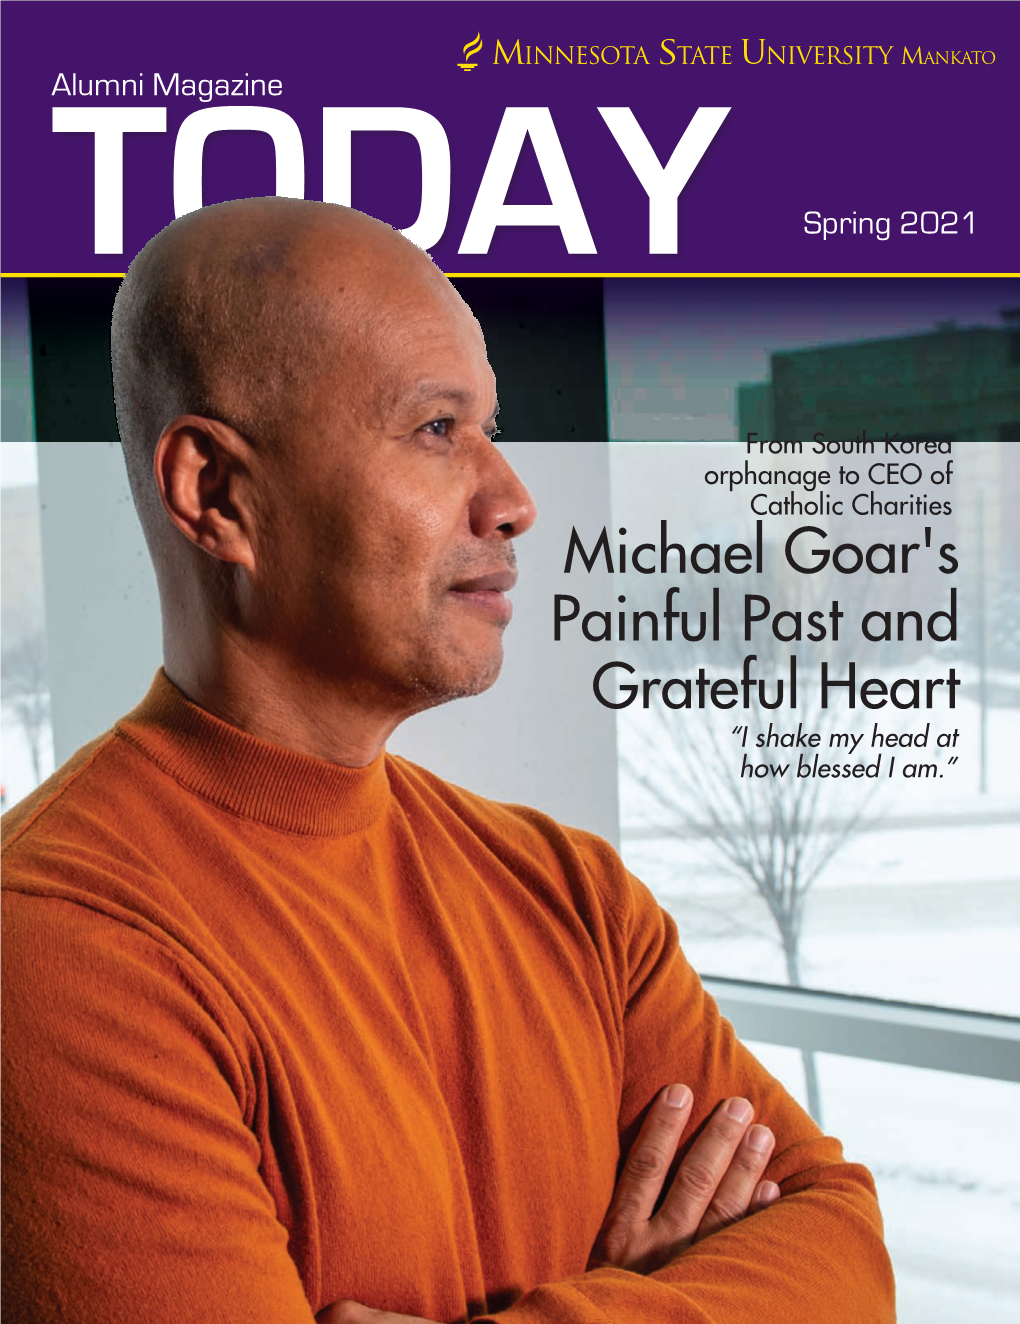 Michael Goar's Painful Past and Grateful Heart